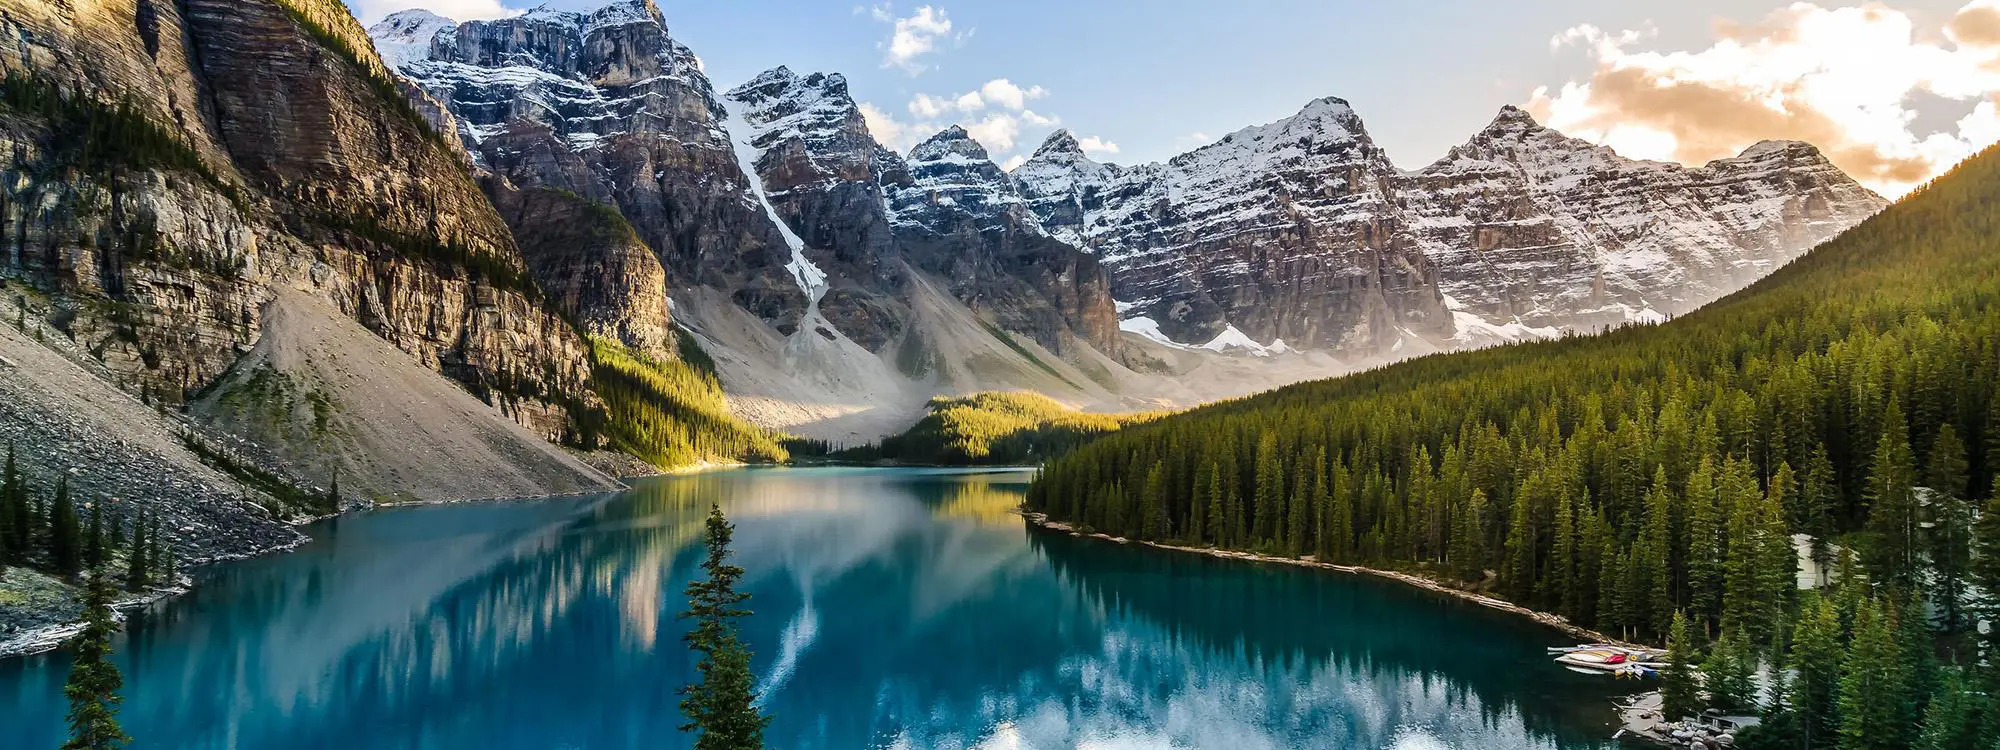 Canadian mountains surrounding a river